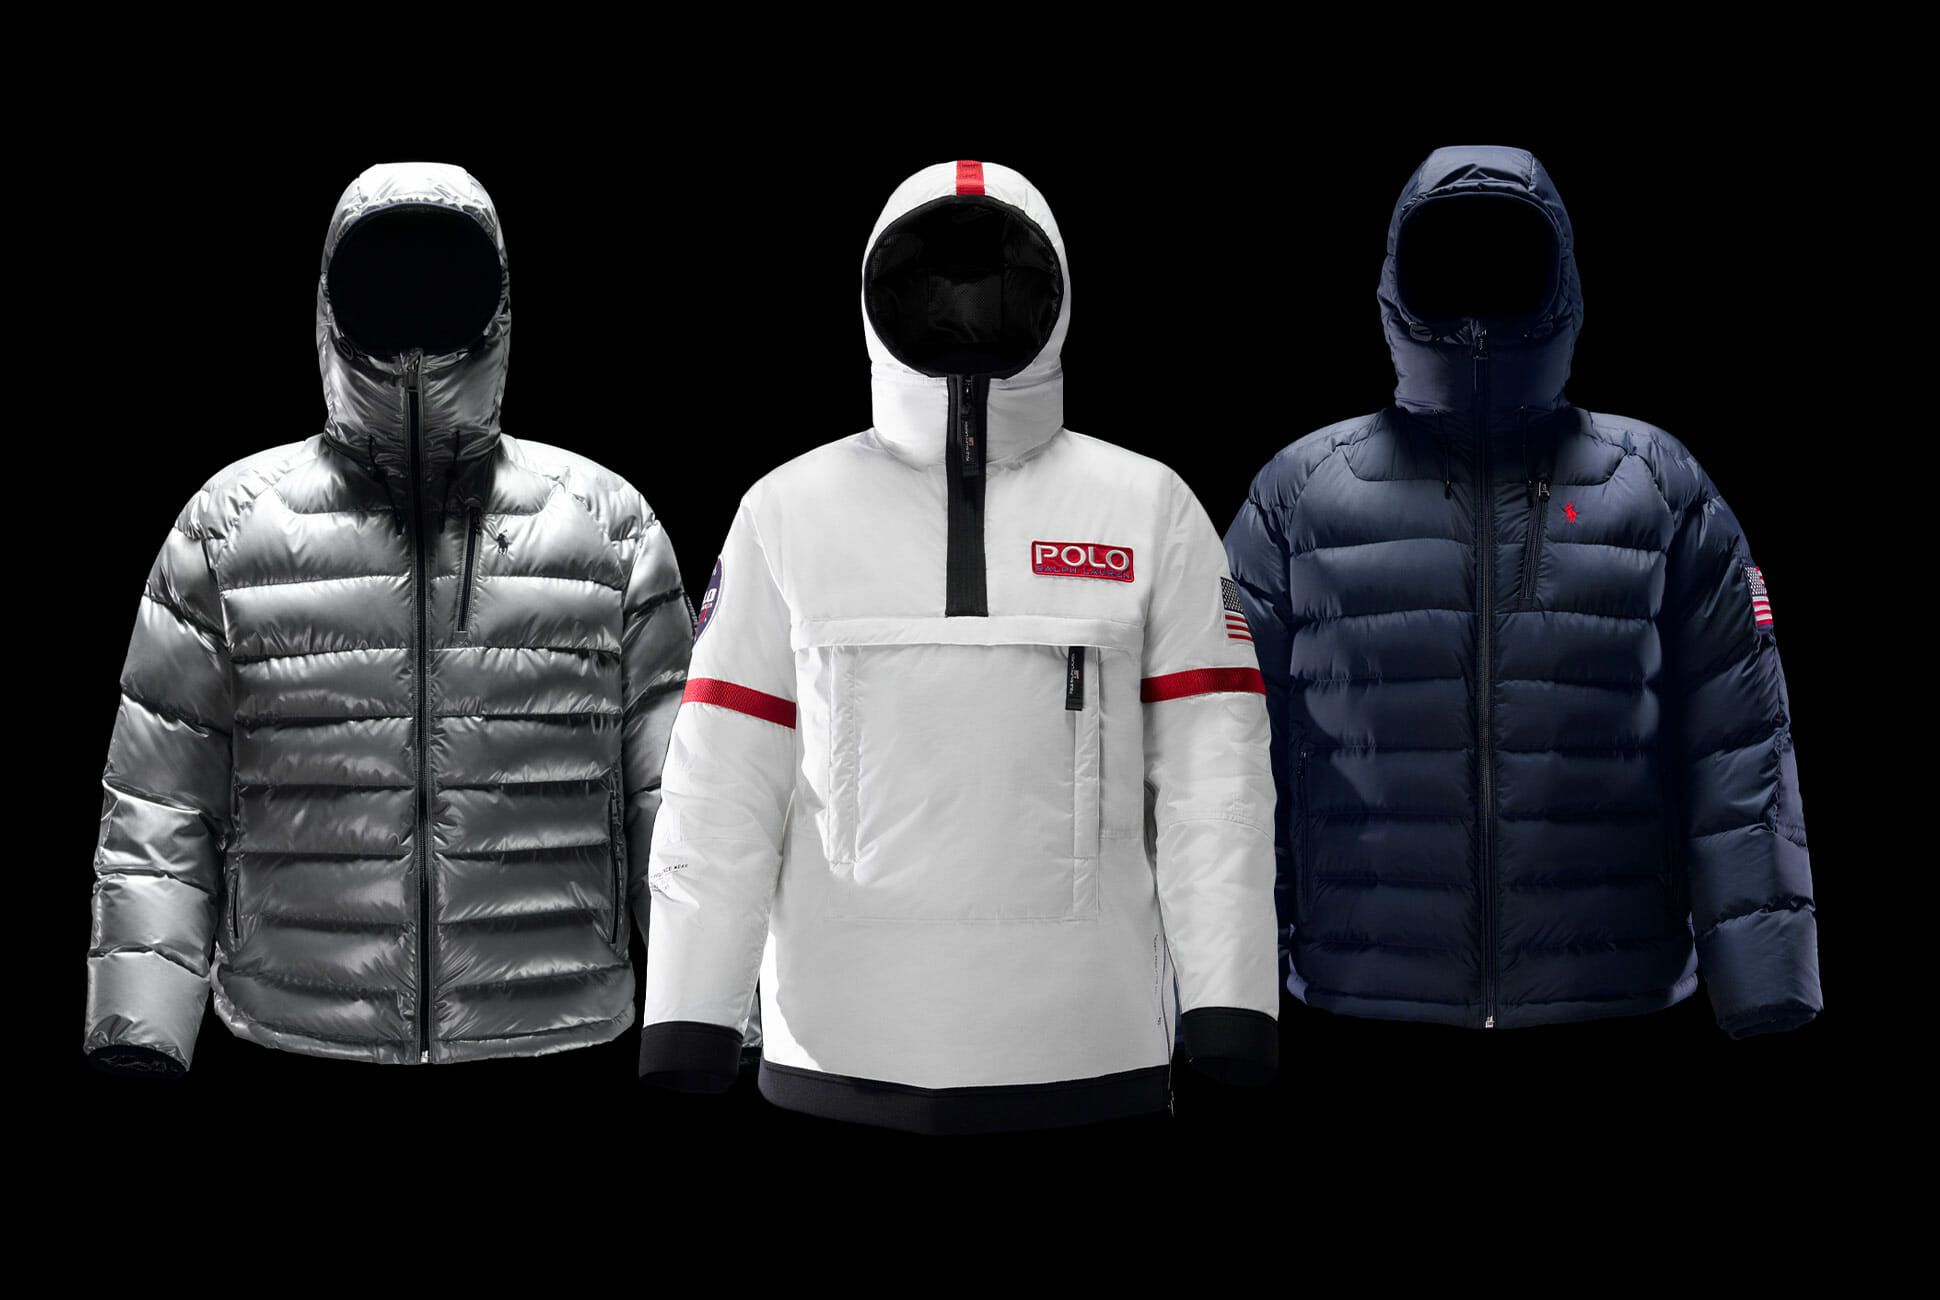 Polo's New Heated Jacket Is Powered By Serious Tech • Gear Patrol